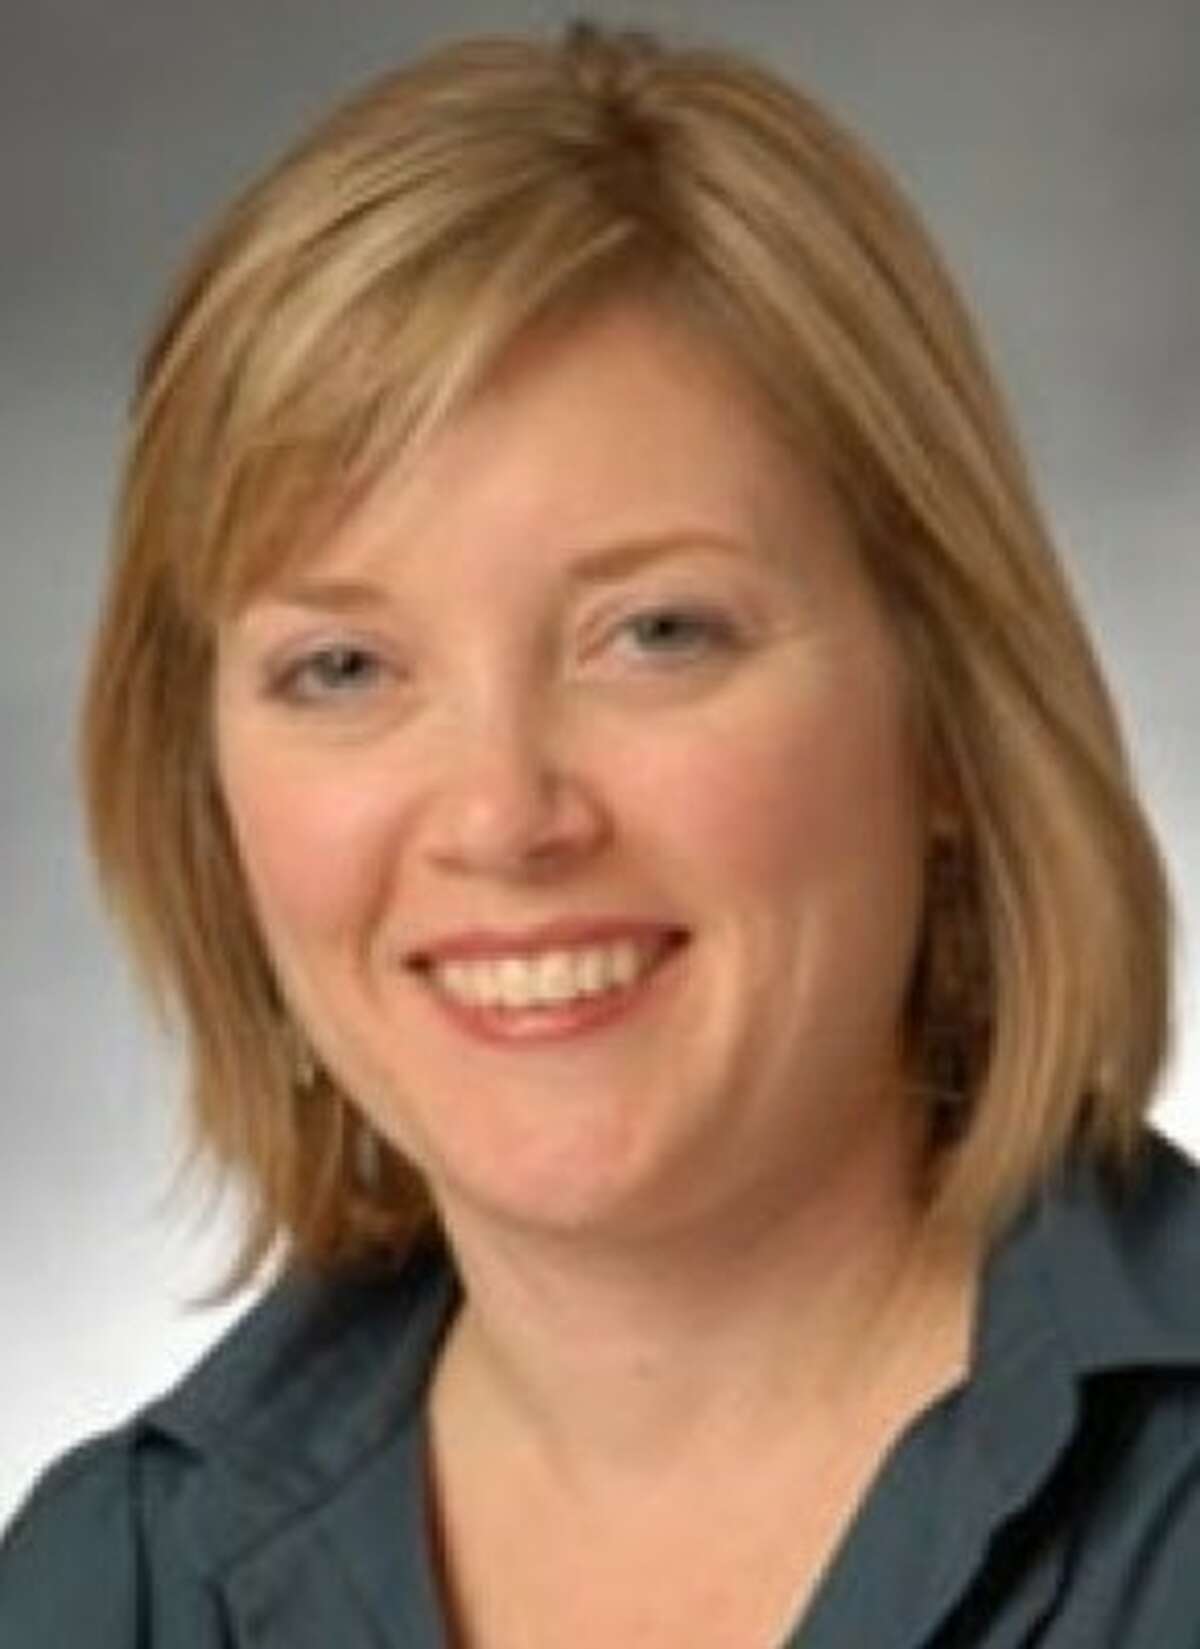 Paula Gant, appointed deputy assistant secretary for oil and natural gas at the U.S. Energy Department in August 2013, formerly worked at the American Gas Association